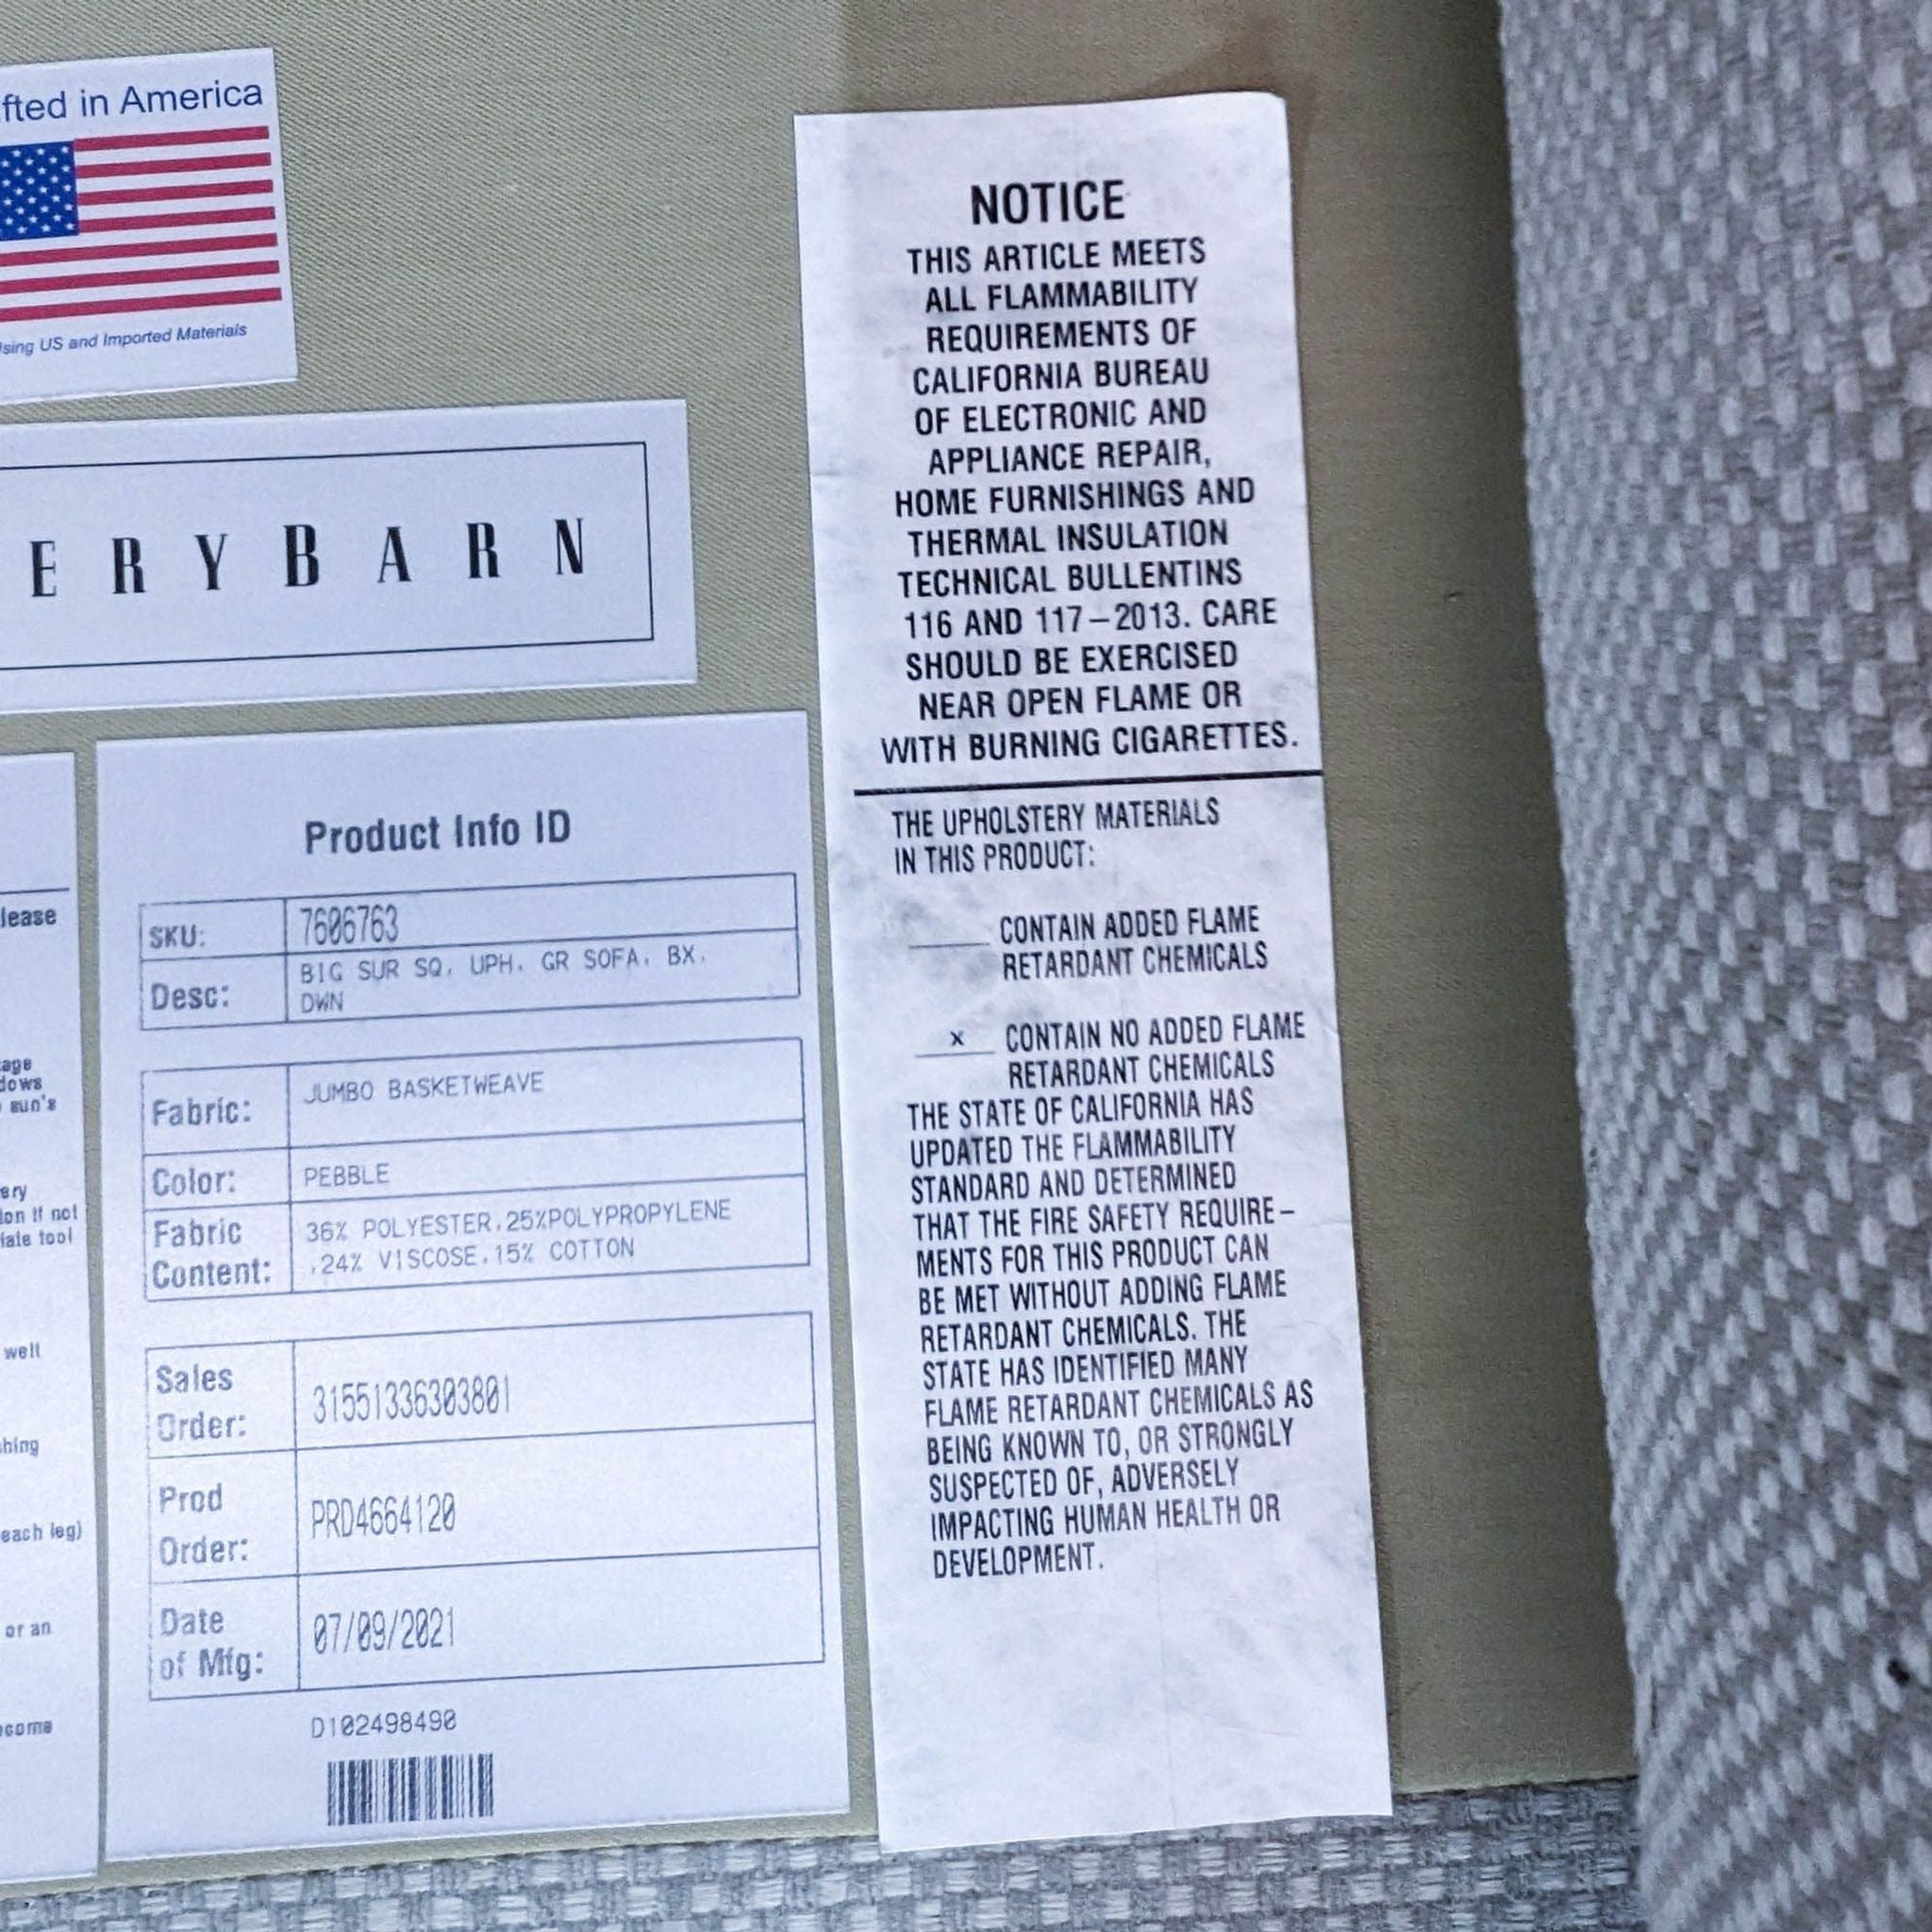 Alt text: Close-up of Pottery Barn product label for a 3-seat Big Sur sofa, indicating fabric details and flammability notice.